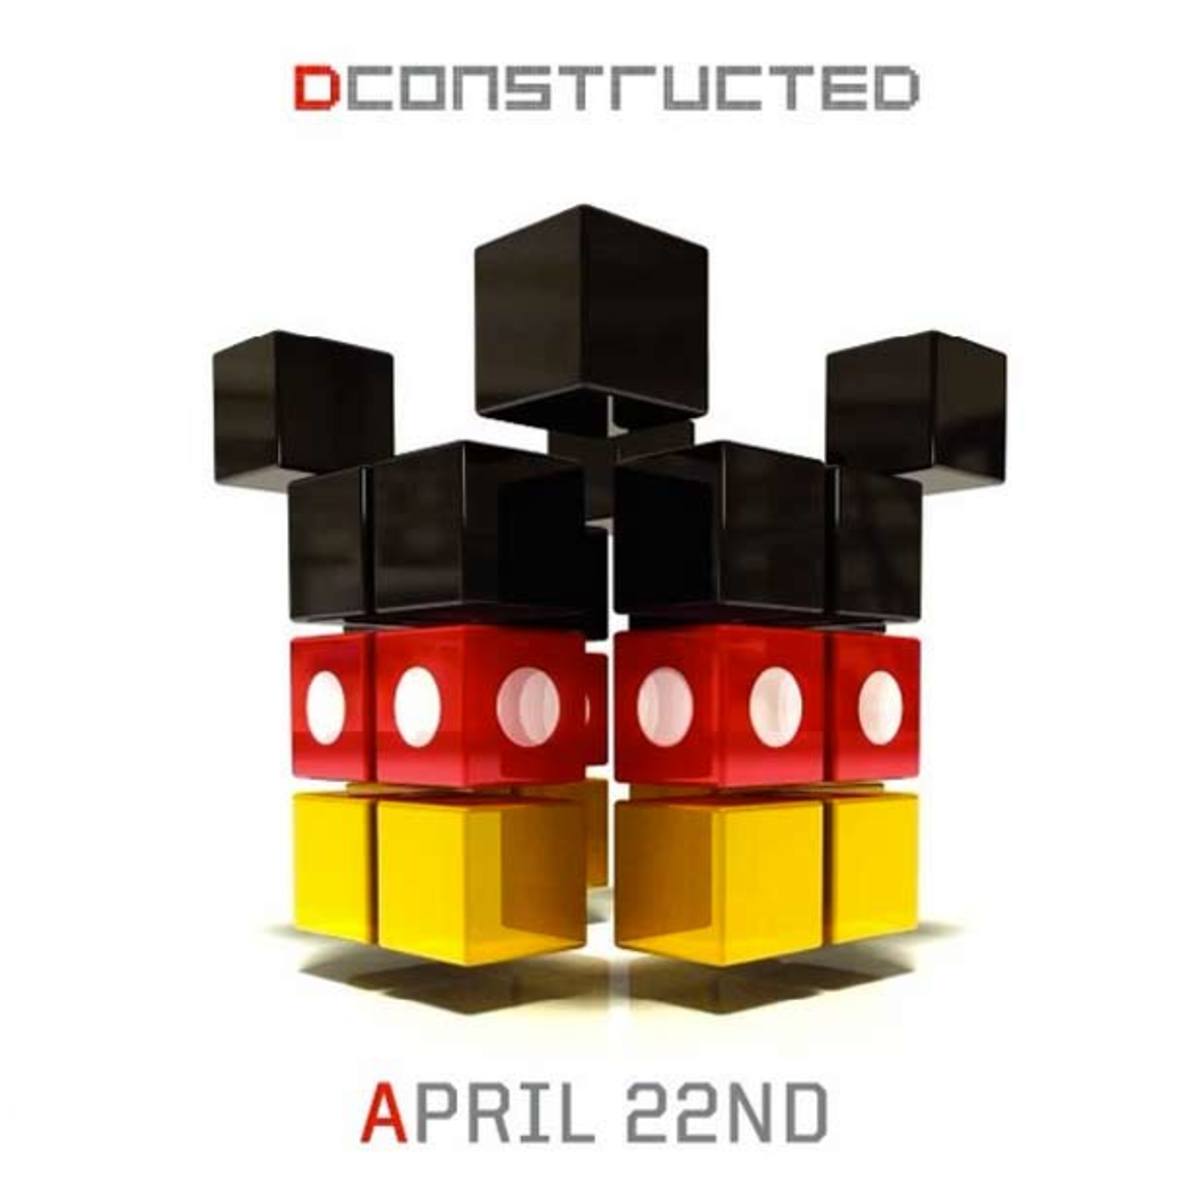 DCONSTRUCTED - New Electronic Music Remixes Made From The Disney Catalog